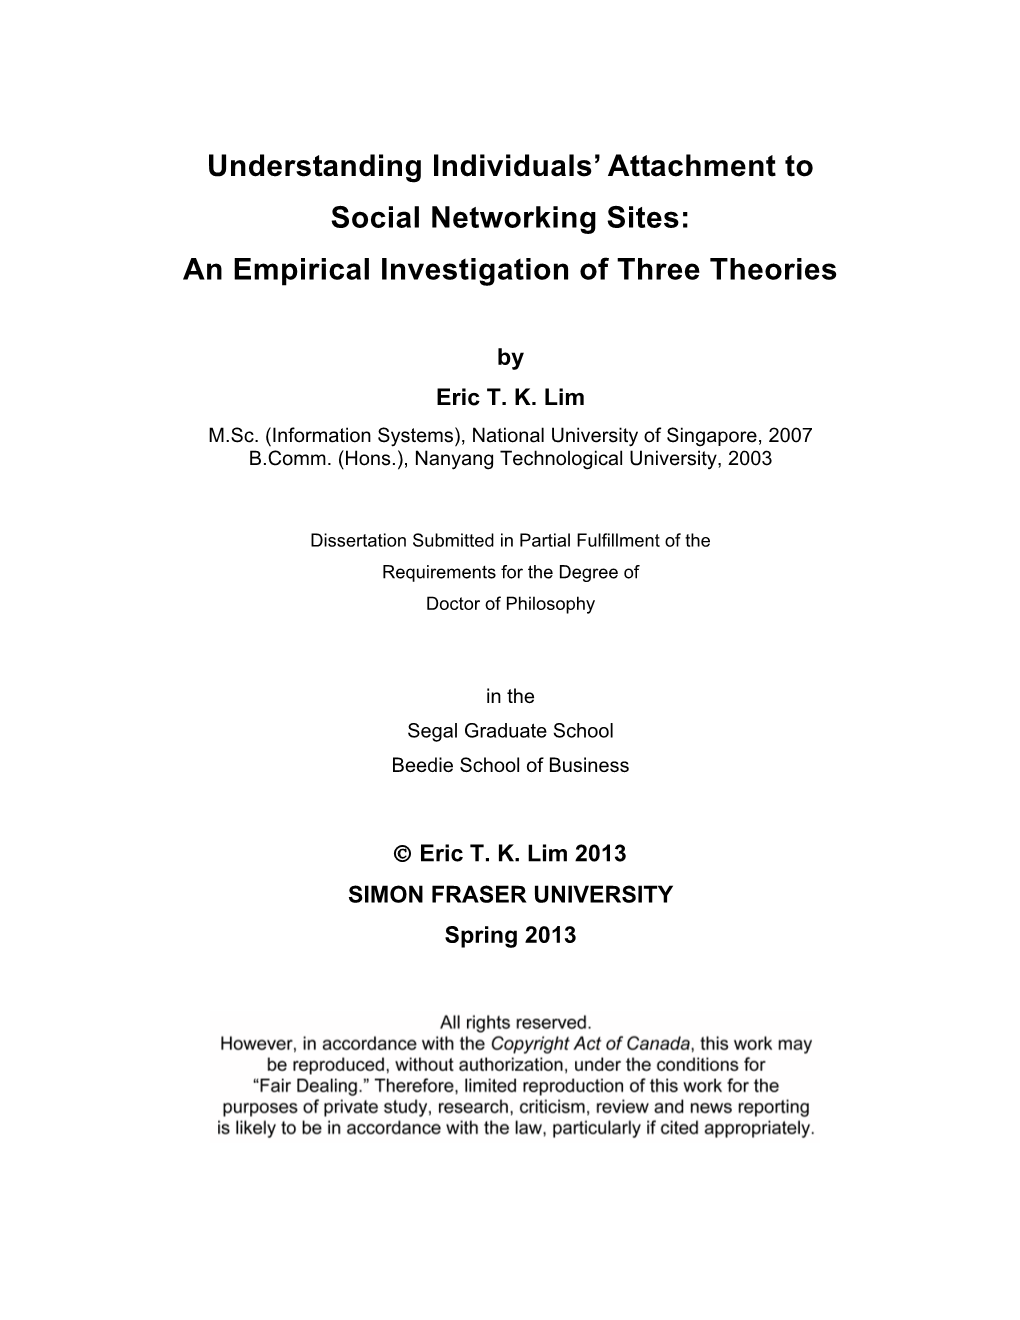 Understanding Individuals' Attachment to Social Networking Sites